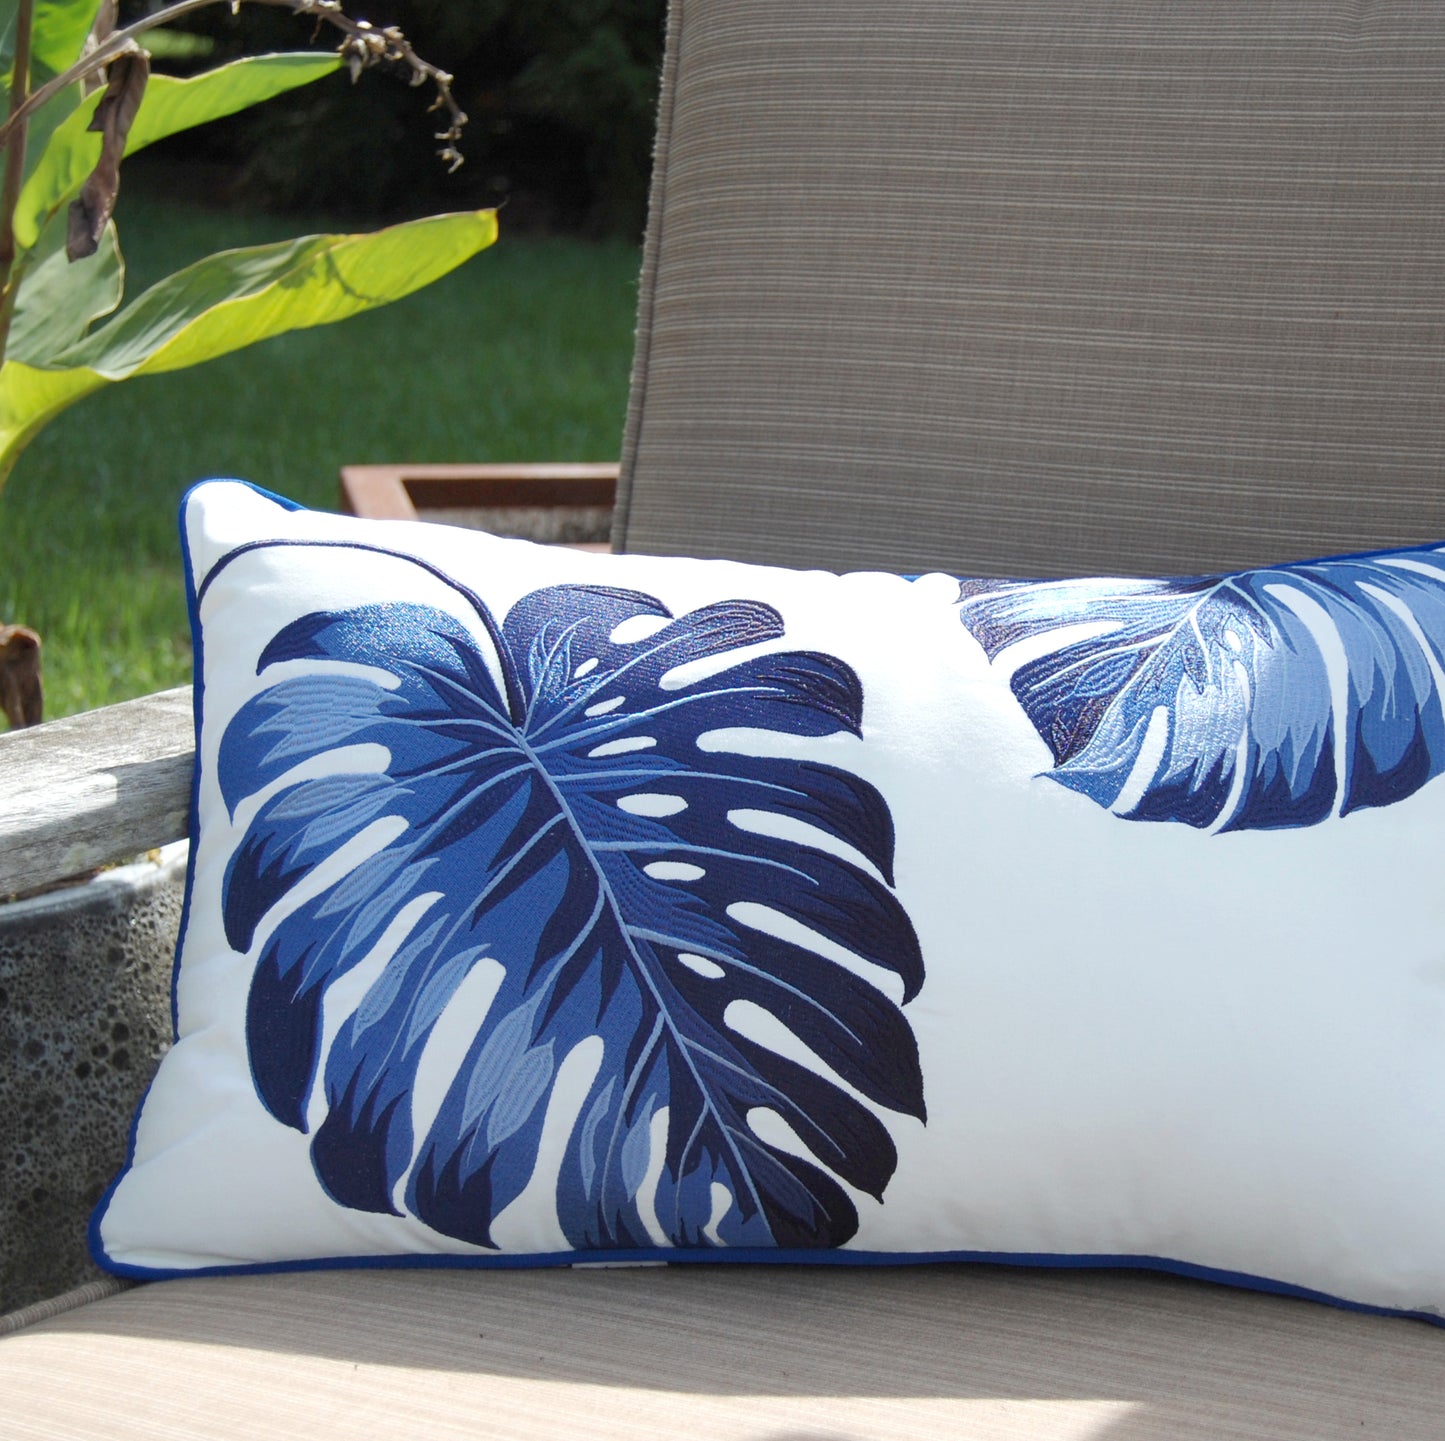 Blue Monstera Lumbar Indoor Outdoor Pillow styled on a patio chair.